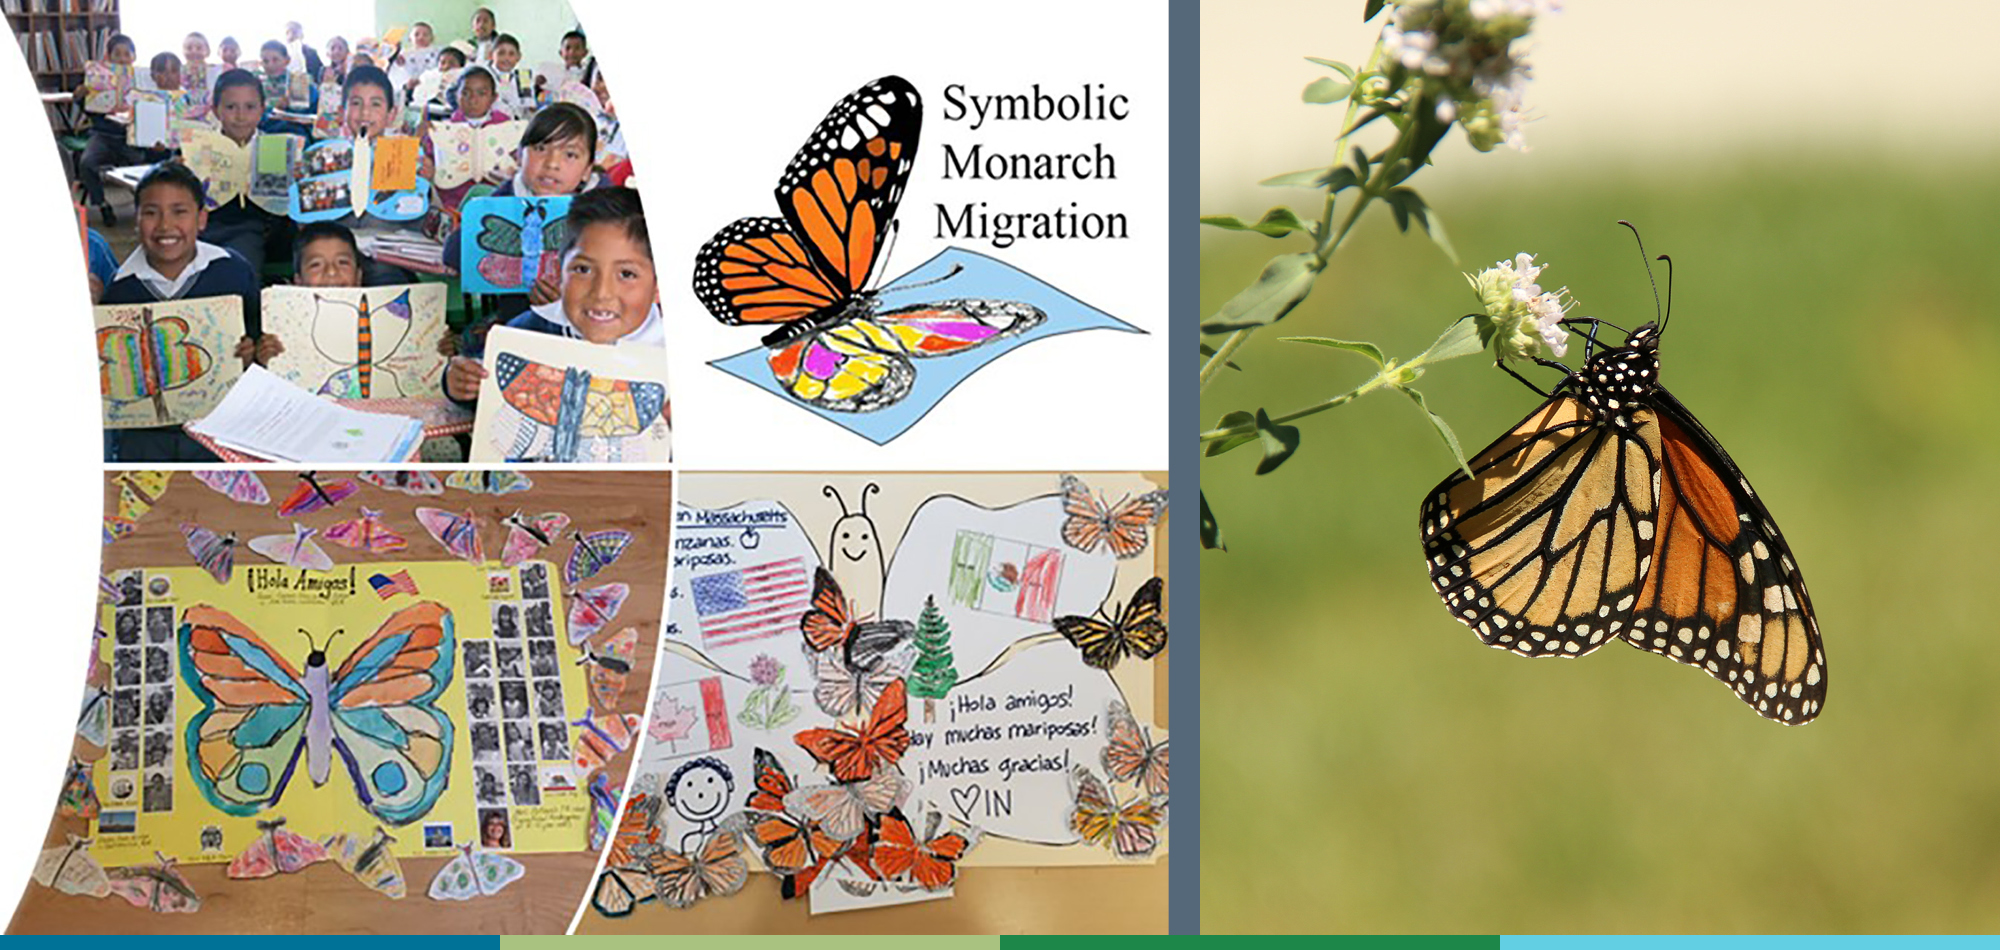 A composite image: On the left is a photo of children holding up drawings of butterflies; on the right is an orange-and-black monarch butterfly on a small white flower